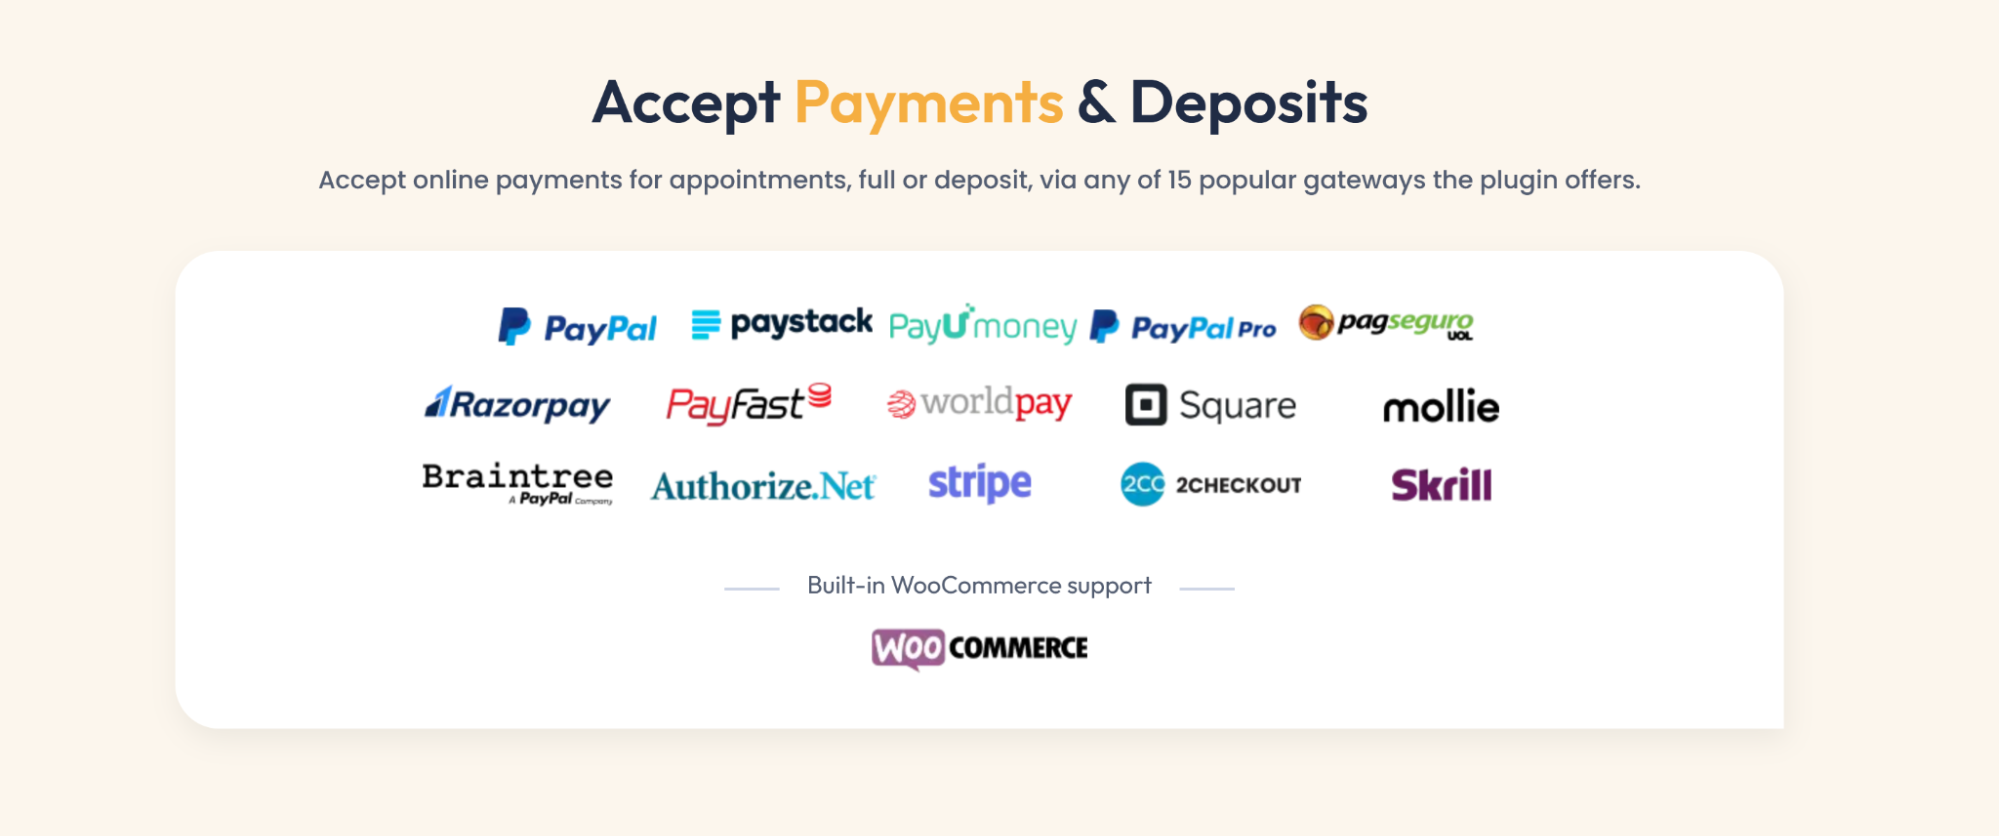 Payment methods supported in BookingPress